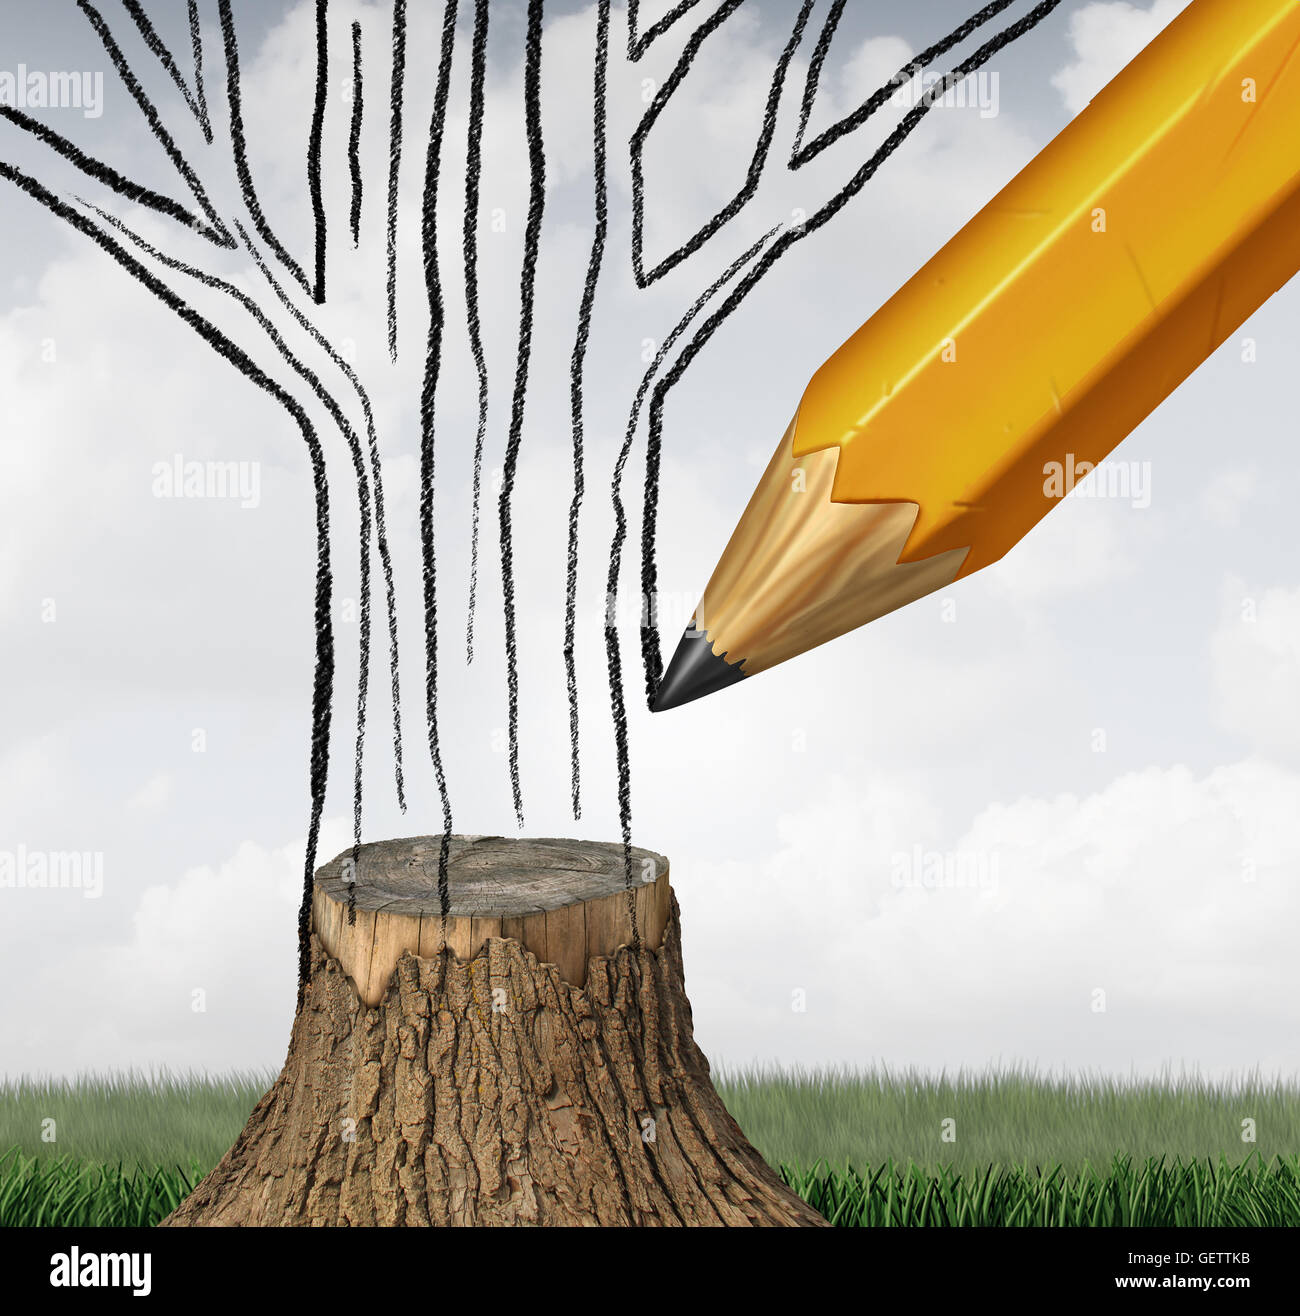 Reforestation and conservation climate as an environmental concept with a pencil drawing the missing part of a cut tree trunk as a symbol for climate change sustainable ecological management with 3D illustration elements. Stock Photo